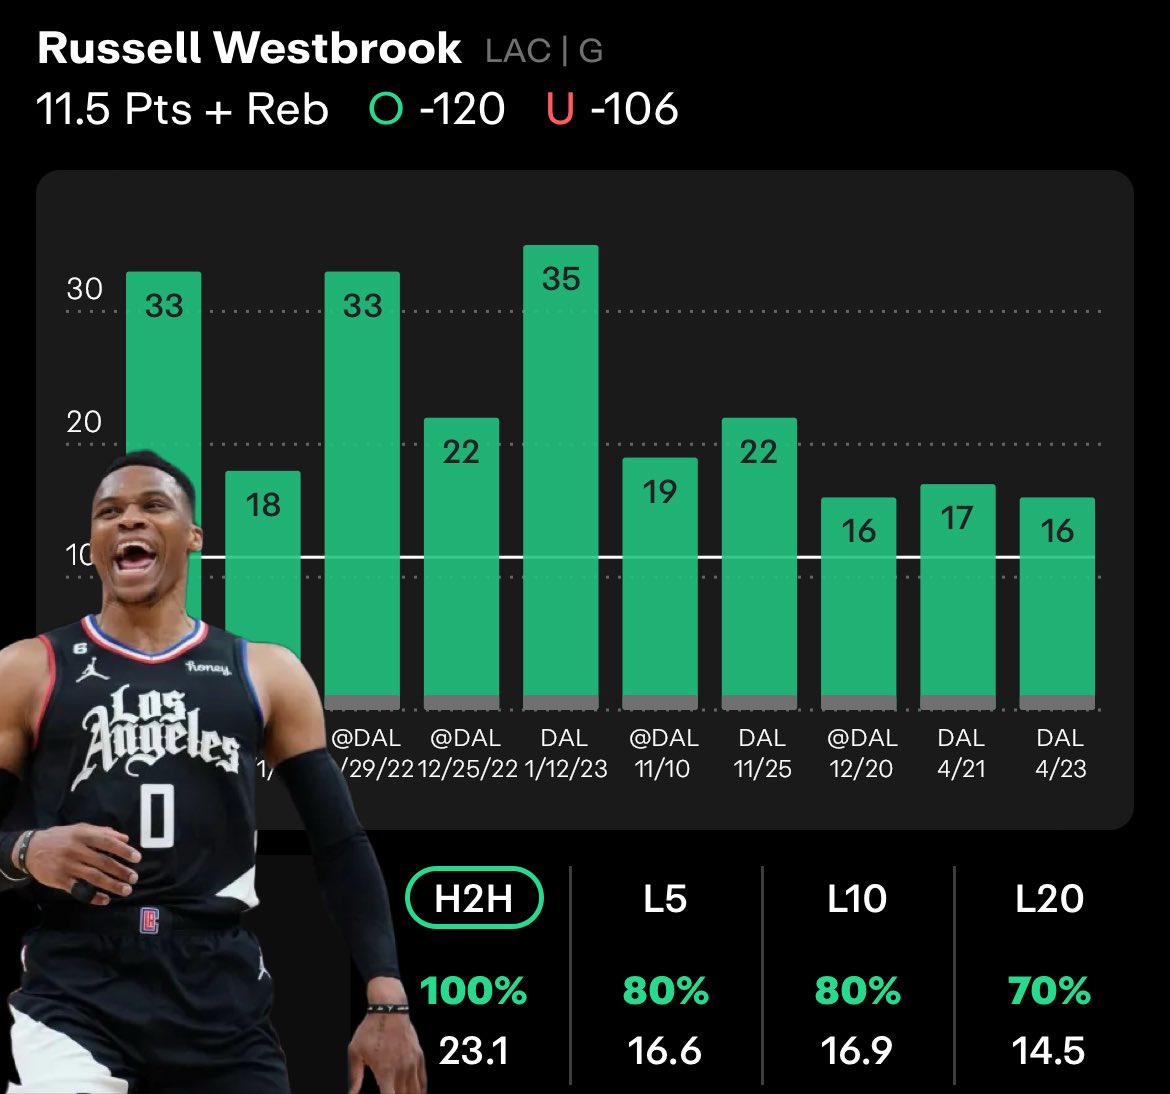 🧪 Russell Westbrook o11.5 Pts + Reb 🏀 💰Risk 1.1u | -110 BetMGM 📊 Data from @propsdotcash 🏀 77% Hitrate on Year 💯 100% Hitrate vs Dallas 🆚 DAL ranks 14th in Pts & 19th in Reb vs PG